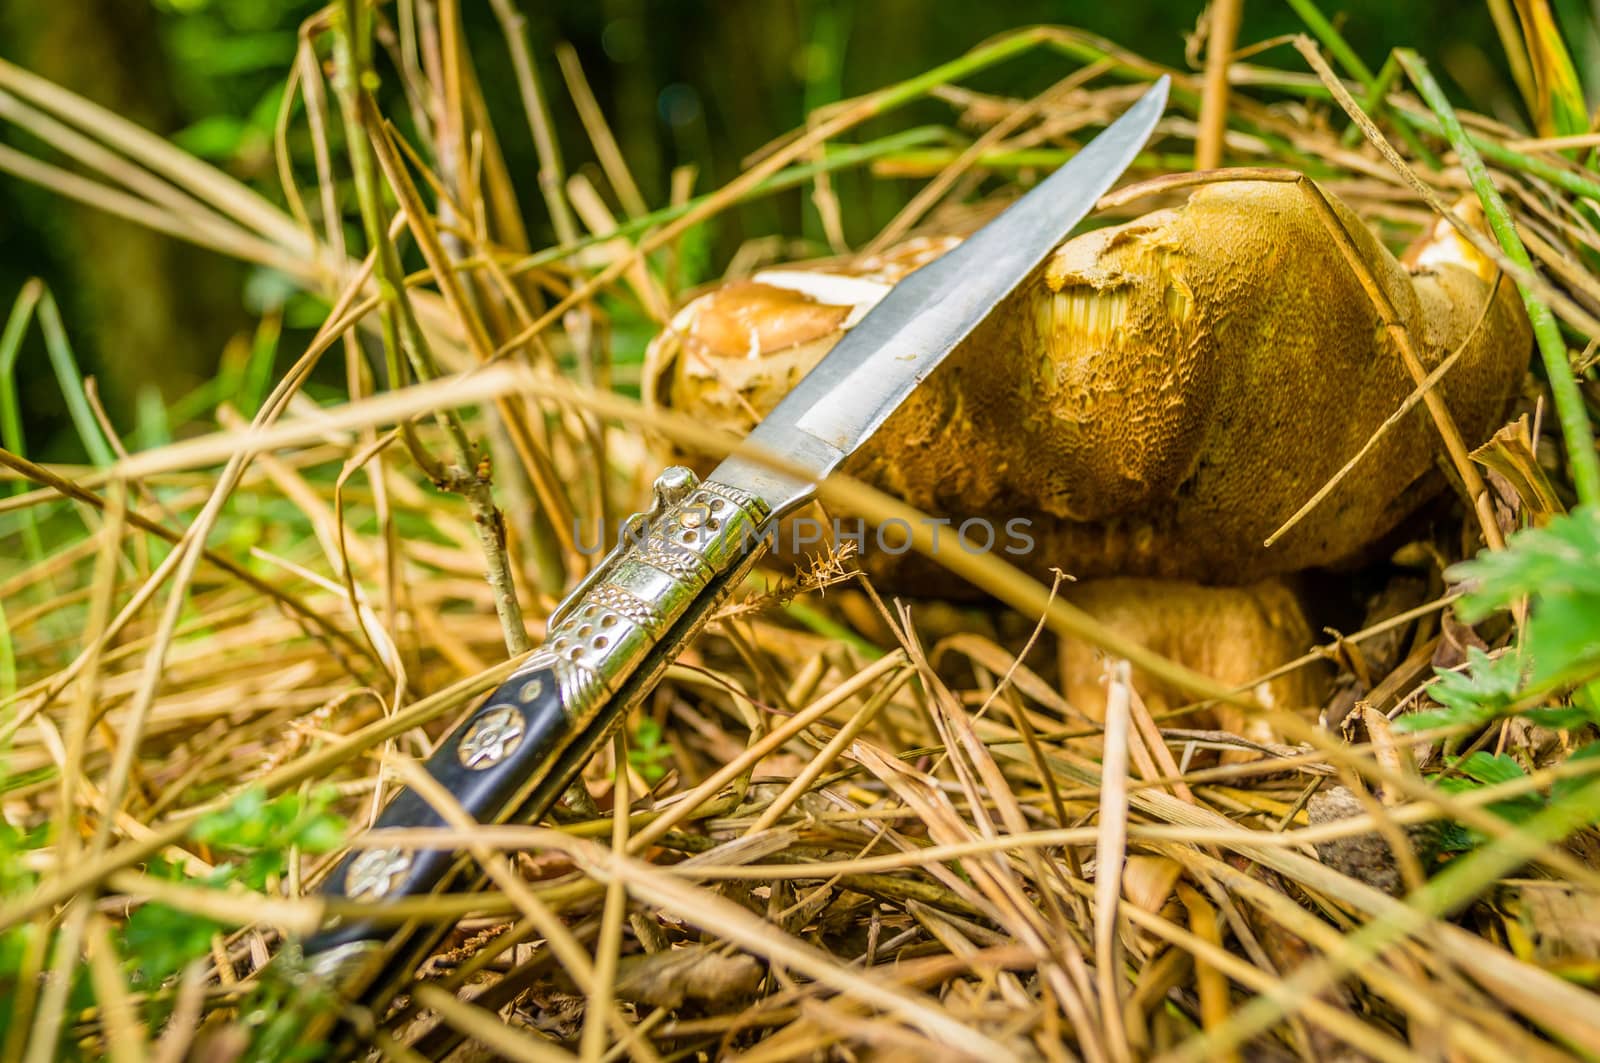 Cep mushroom and a knife in the summer